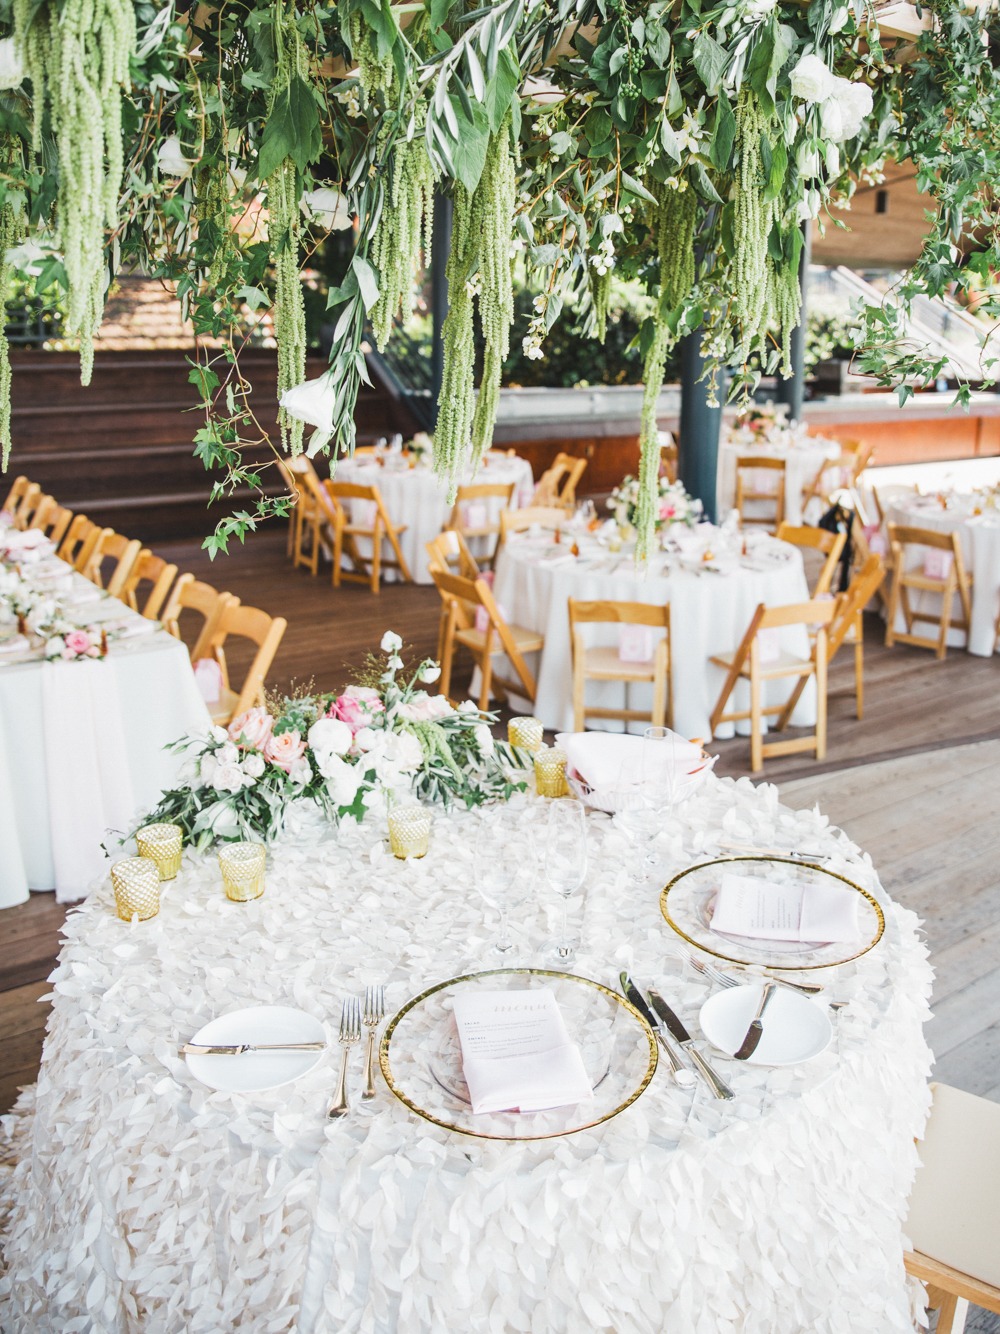 sweetheart table with cascading greenery chandelier